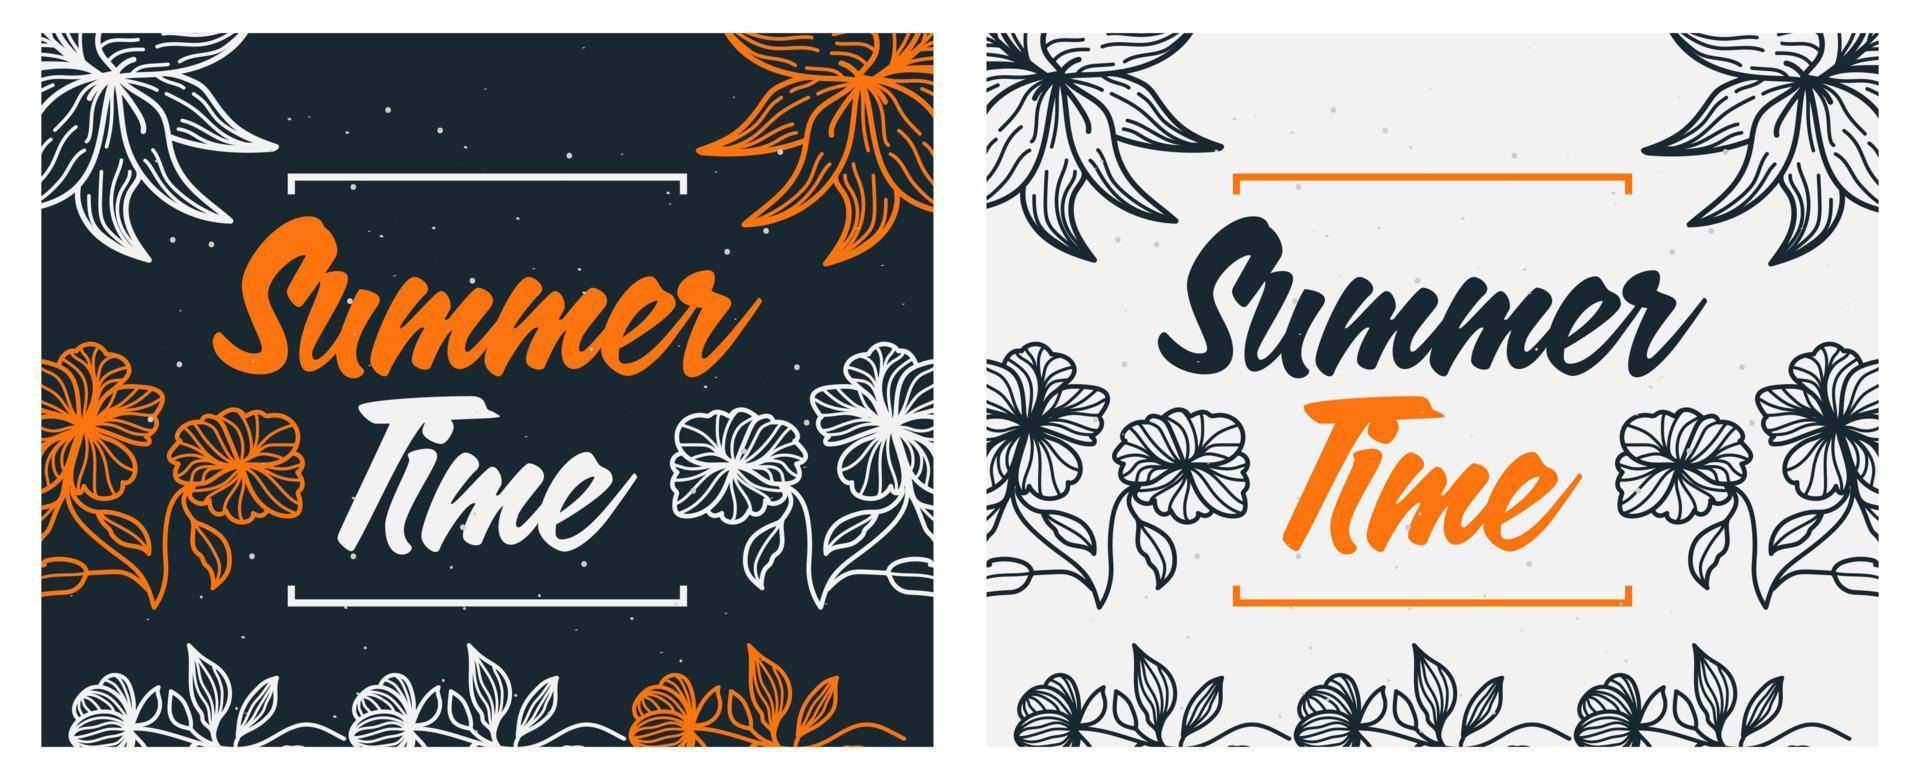 Summer Festive Background with Flowers Illustration. Summer Time Background for Banner, Poster, Card, or Party Invitation Design vector